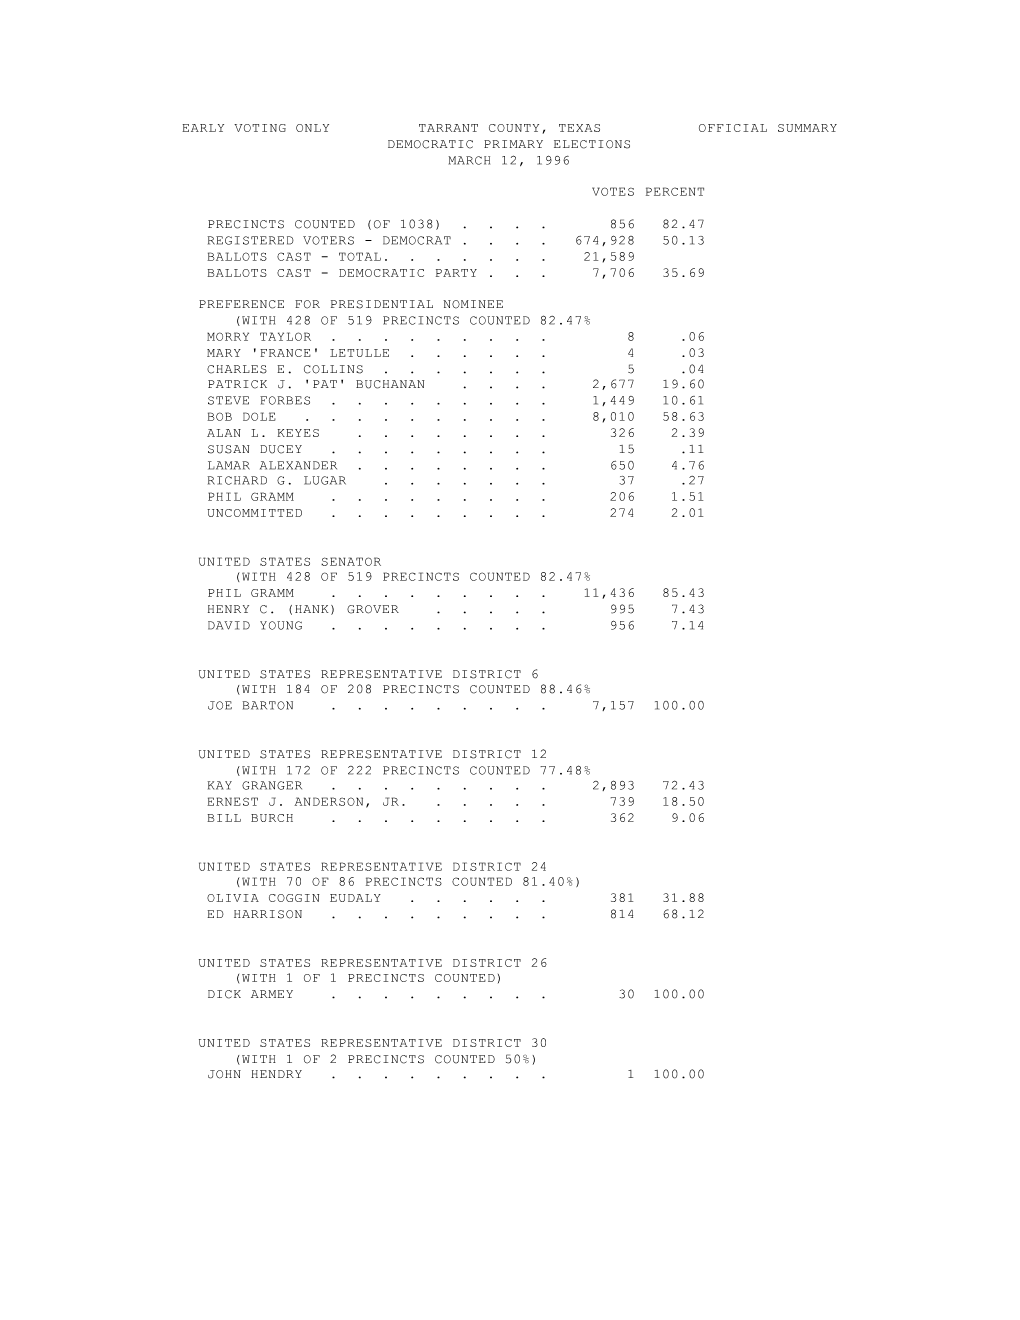 Early Voting Only Tarrant County, Texas Official Summary Democratic Primary Elections March 12, 1996 Votes Percent Preci